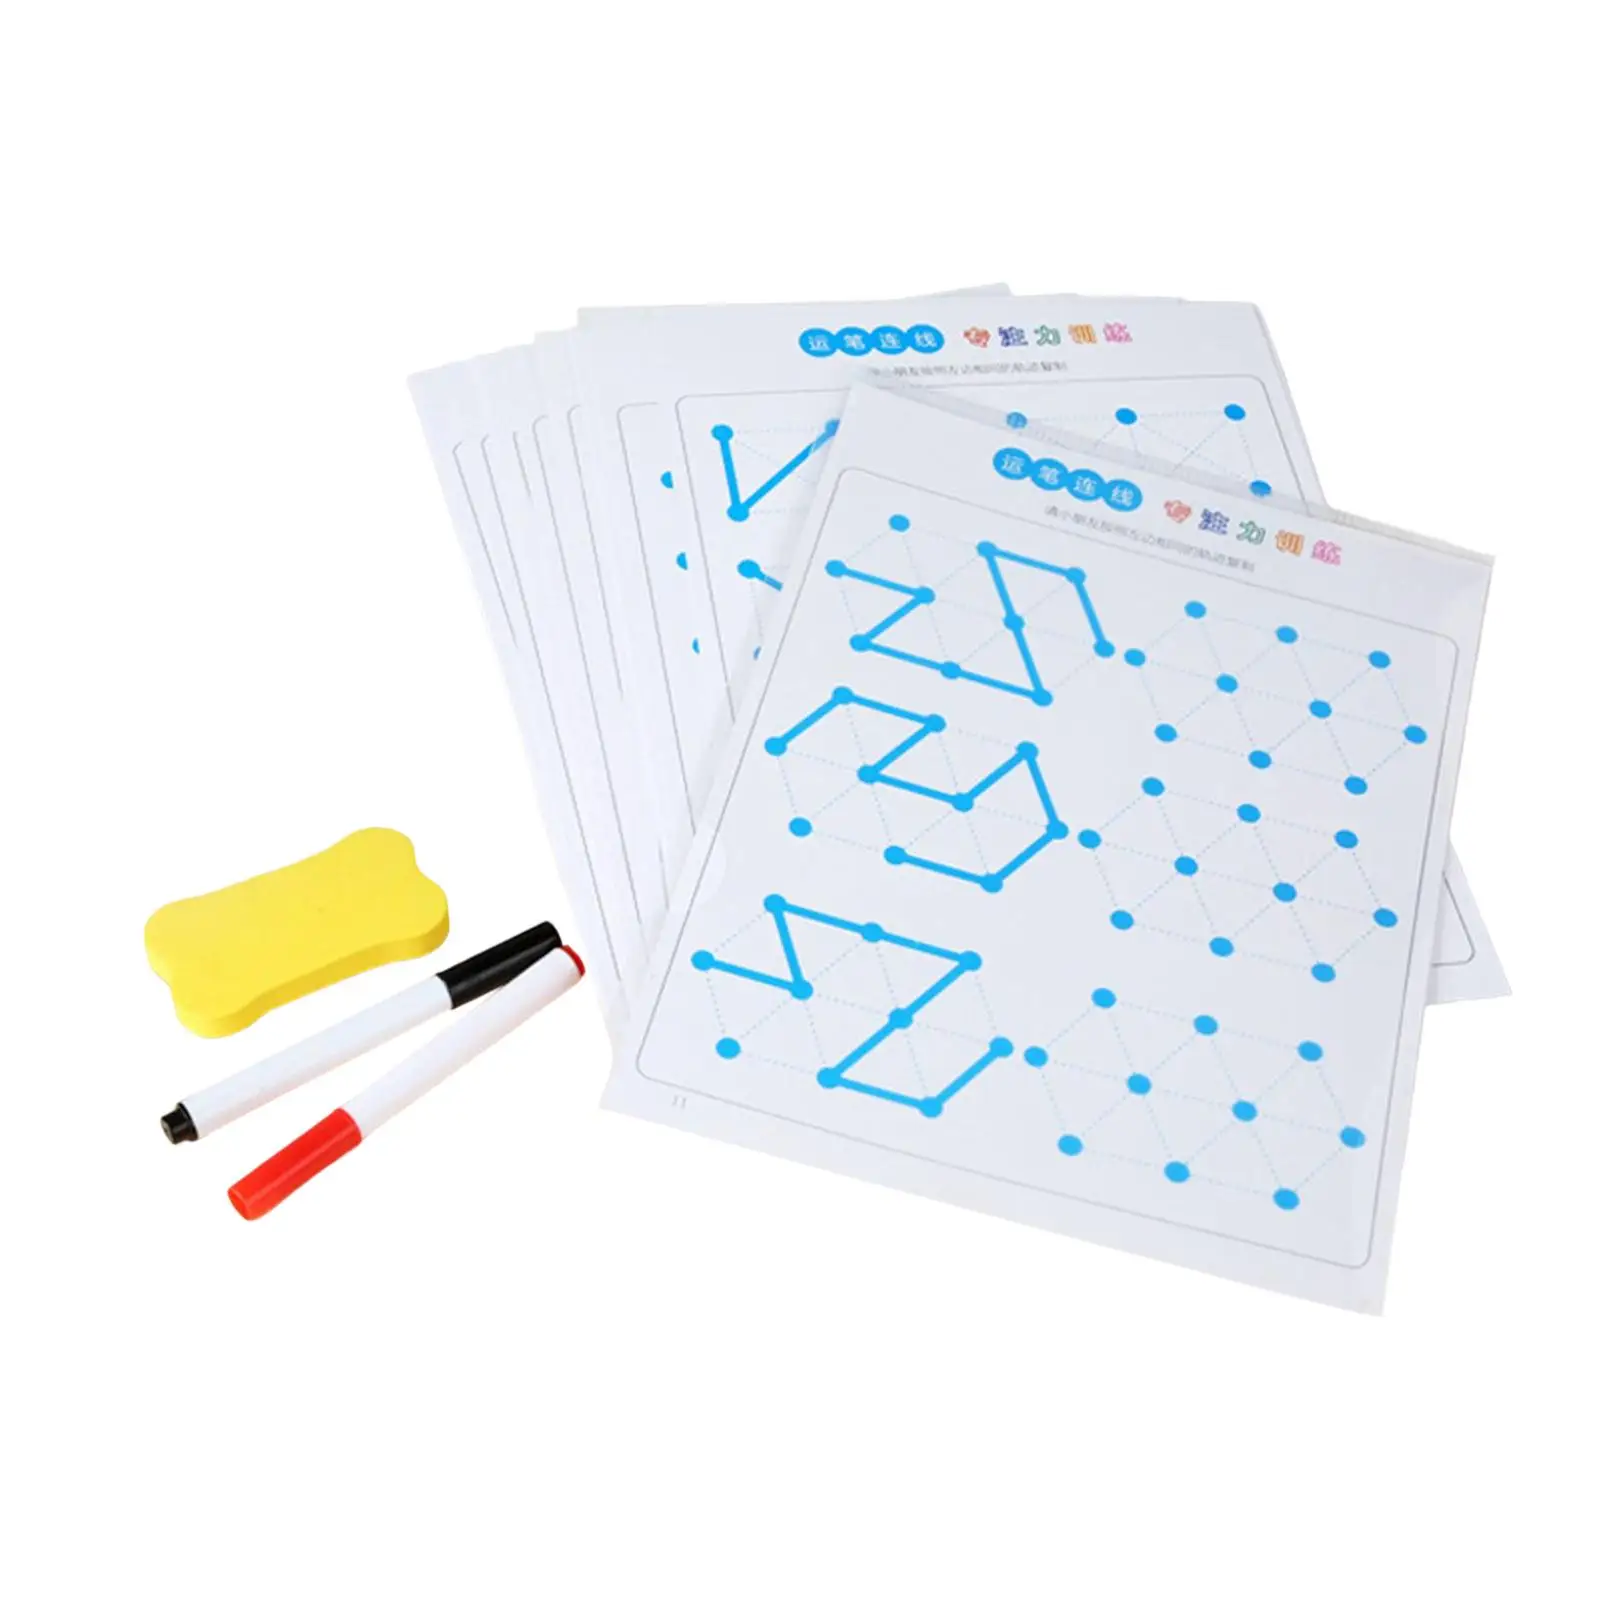 24 Pieces Wipe Clean Workbook Tracing with Erasers Durable Funny Pen Control Line Tracing Cards for Gift Practice Shape Tracing